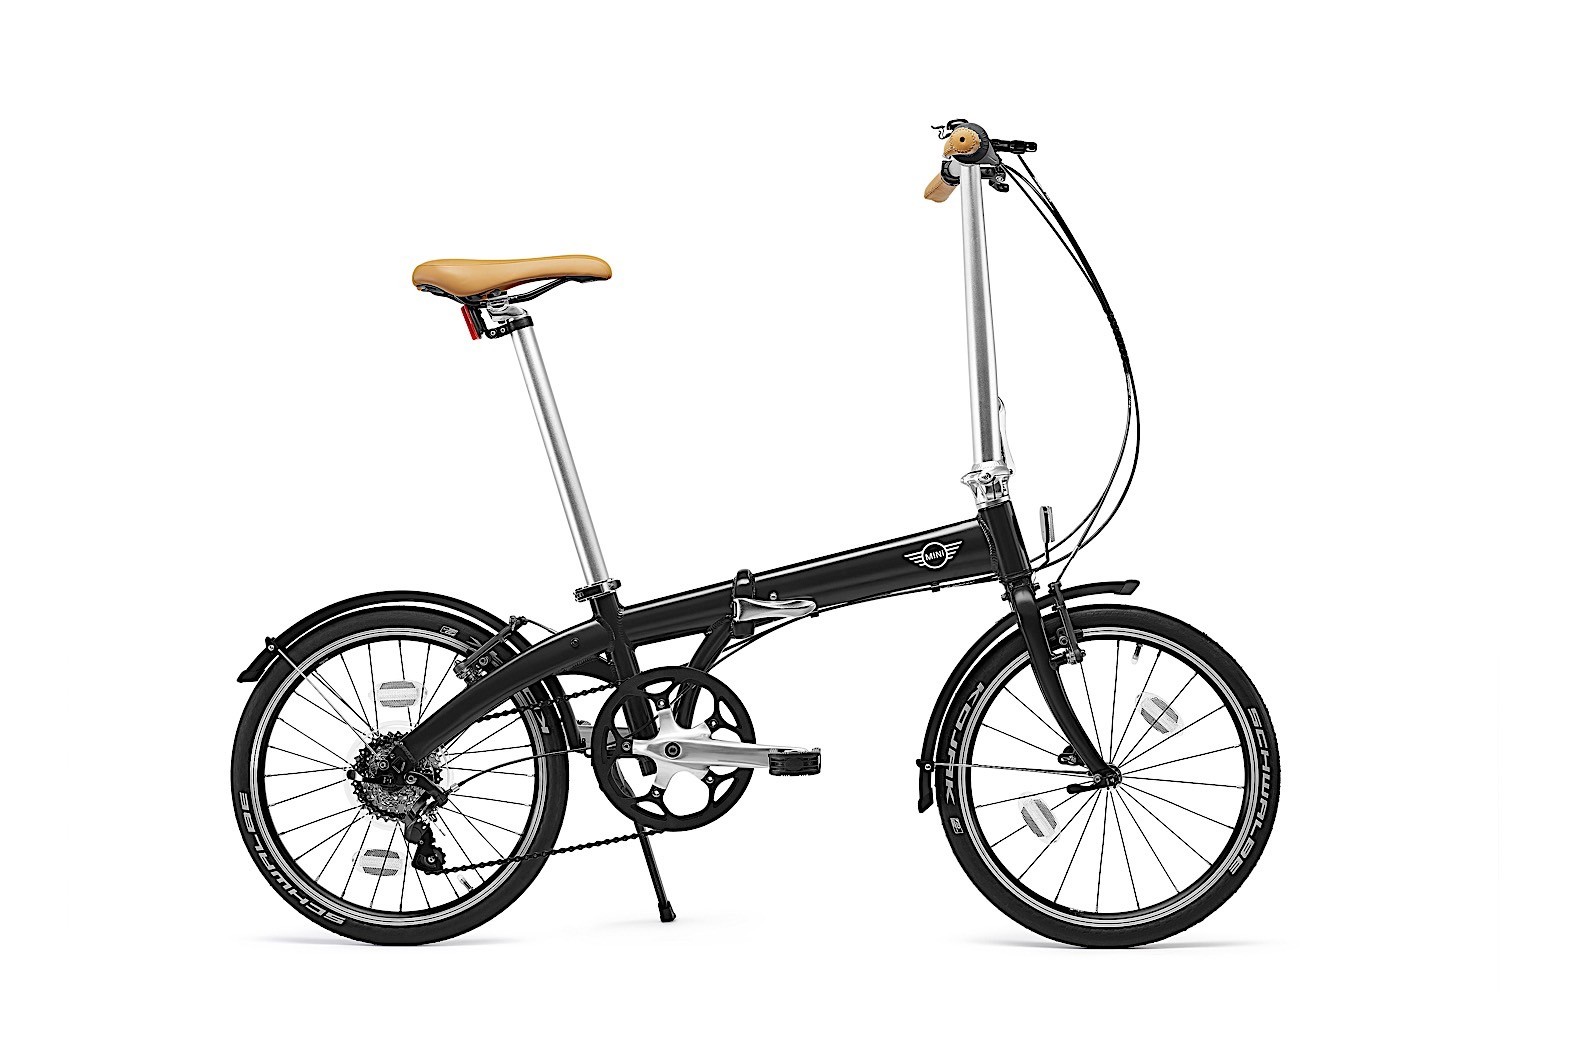 MINI Gets Ready for Sunny Days with New Folding Bike - autoevolution